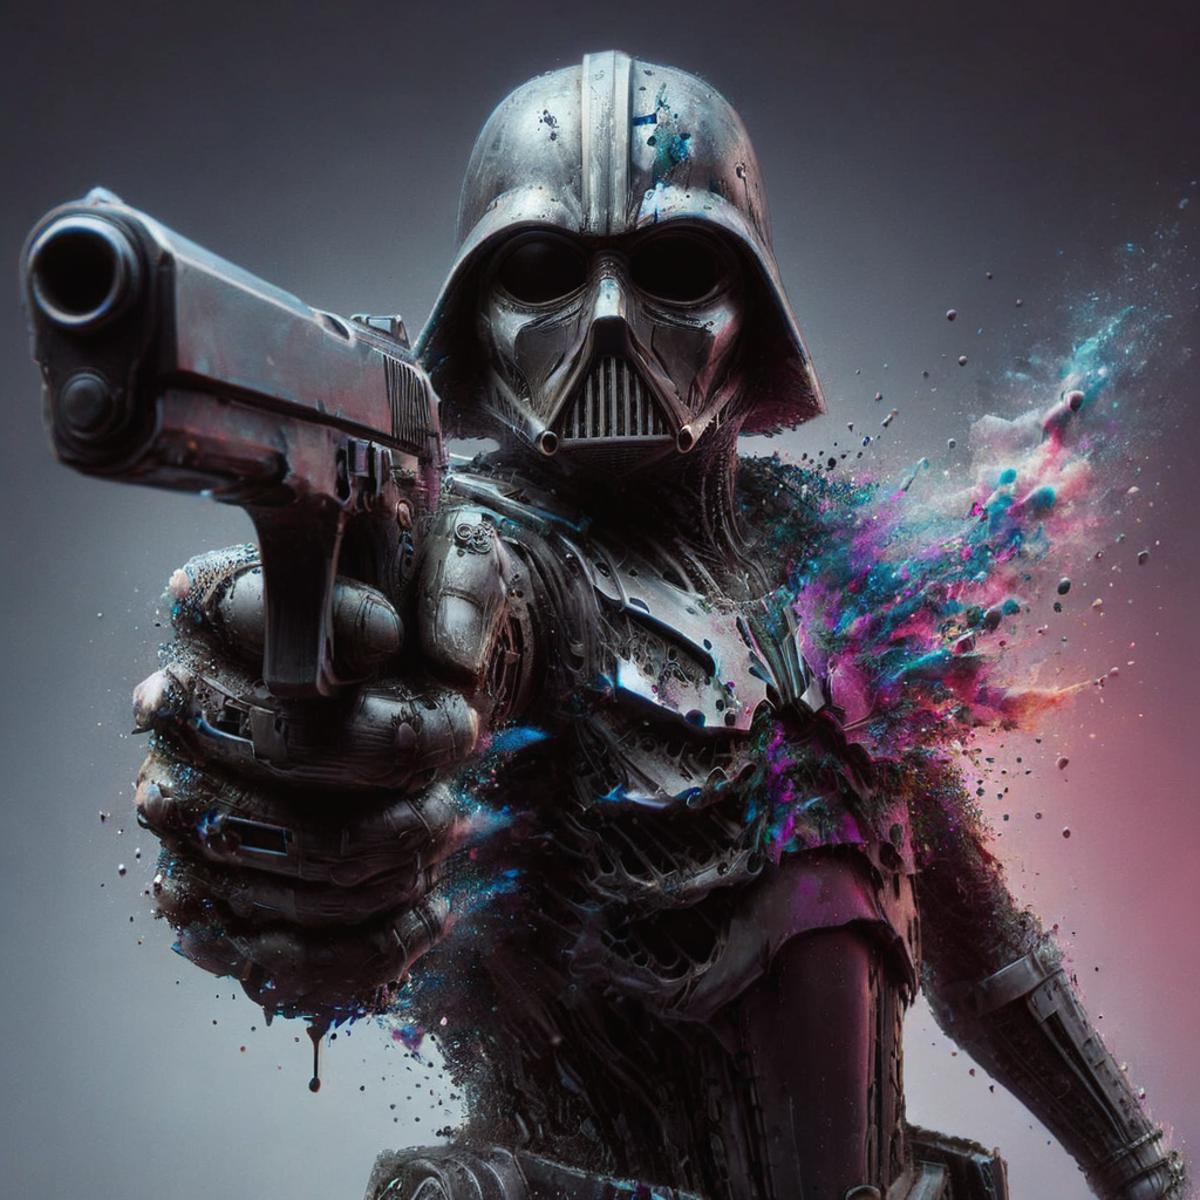 A Darth Vader action figure holding a gun with an explosion in the background.